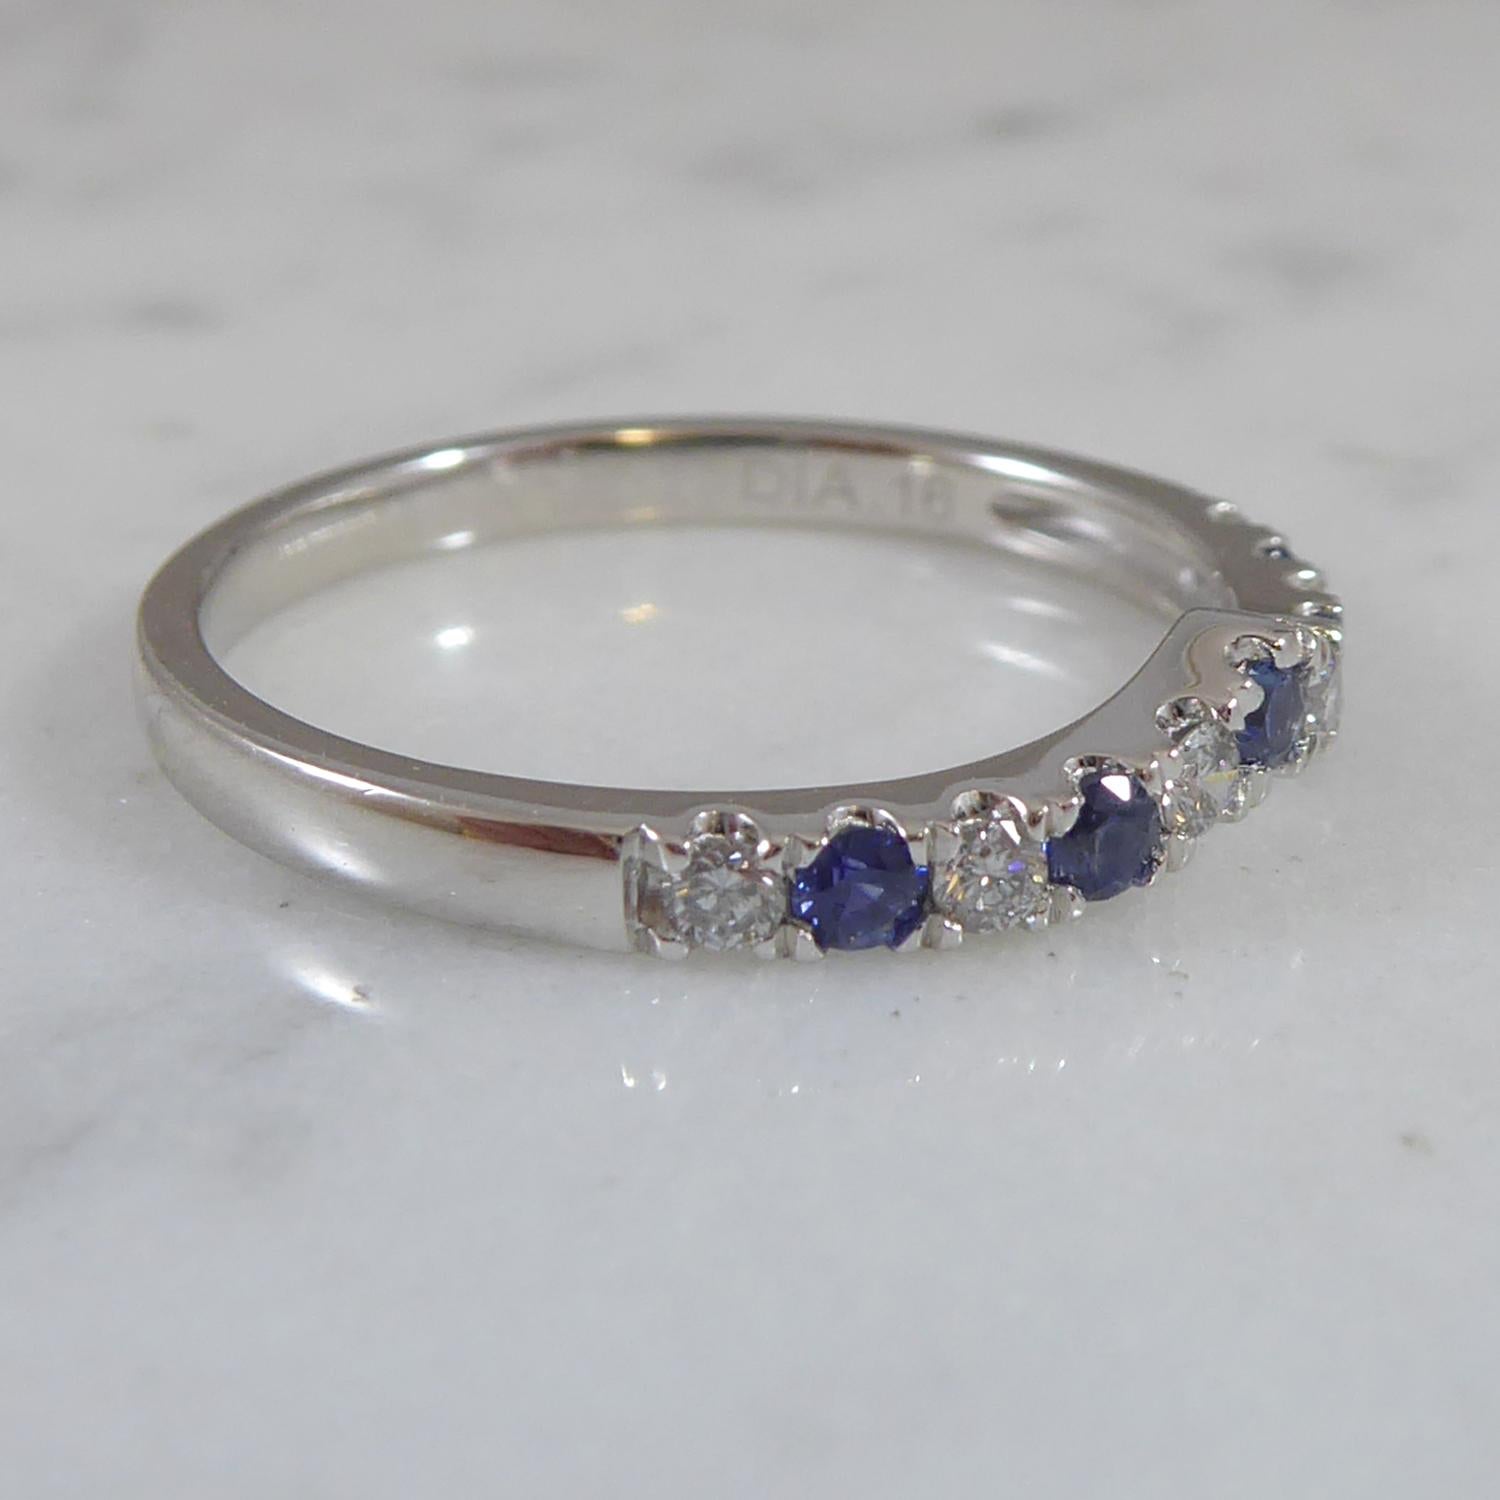 A lovely sapphire and diamond set new and unworn band in a small V shaped wishbone design.  The ring is so perfectly adaptable to wear as a wedding band, with the V sitting around a solitaire, or as a modern dress ring to wear alone or as part of a